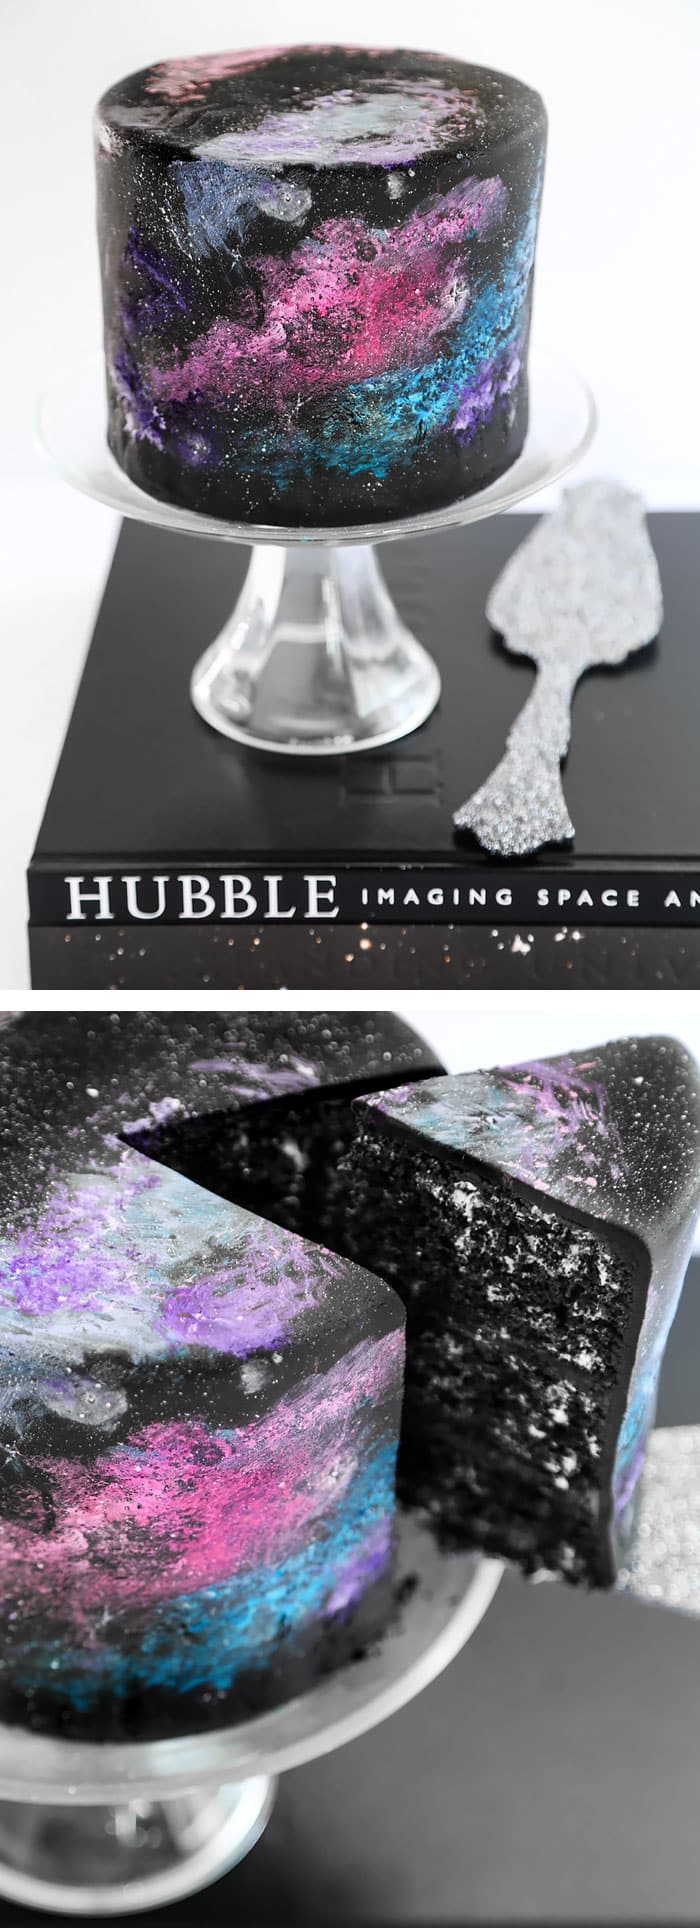 AD-Galaxy-Cakes-Space-Sweets-Nebula-Cosmos-Universe-02 (1)